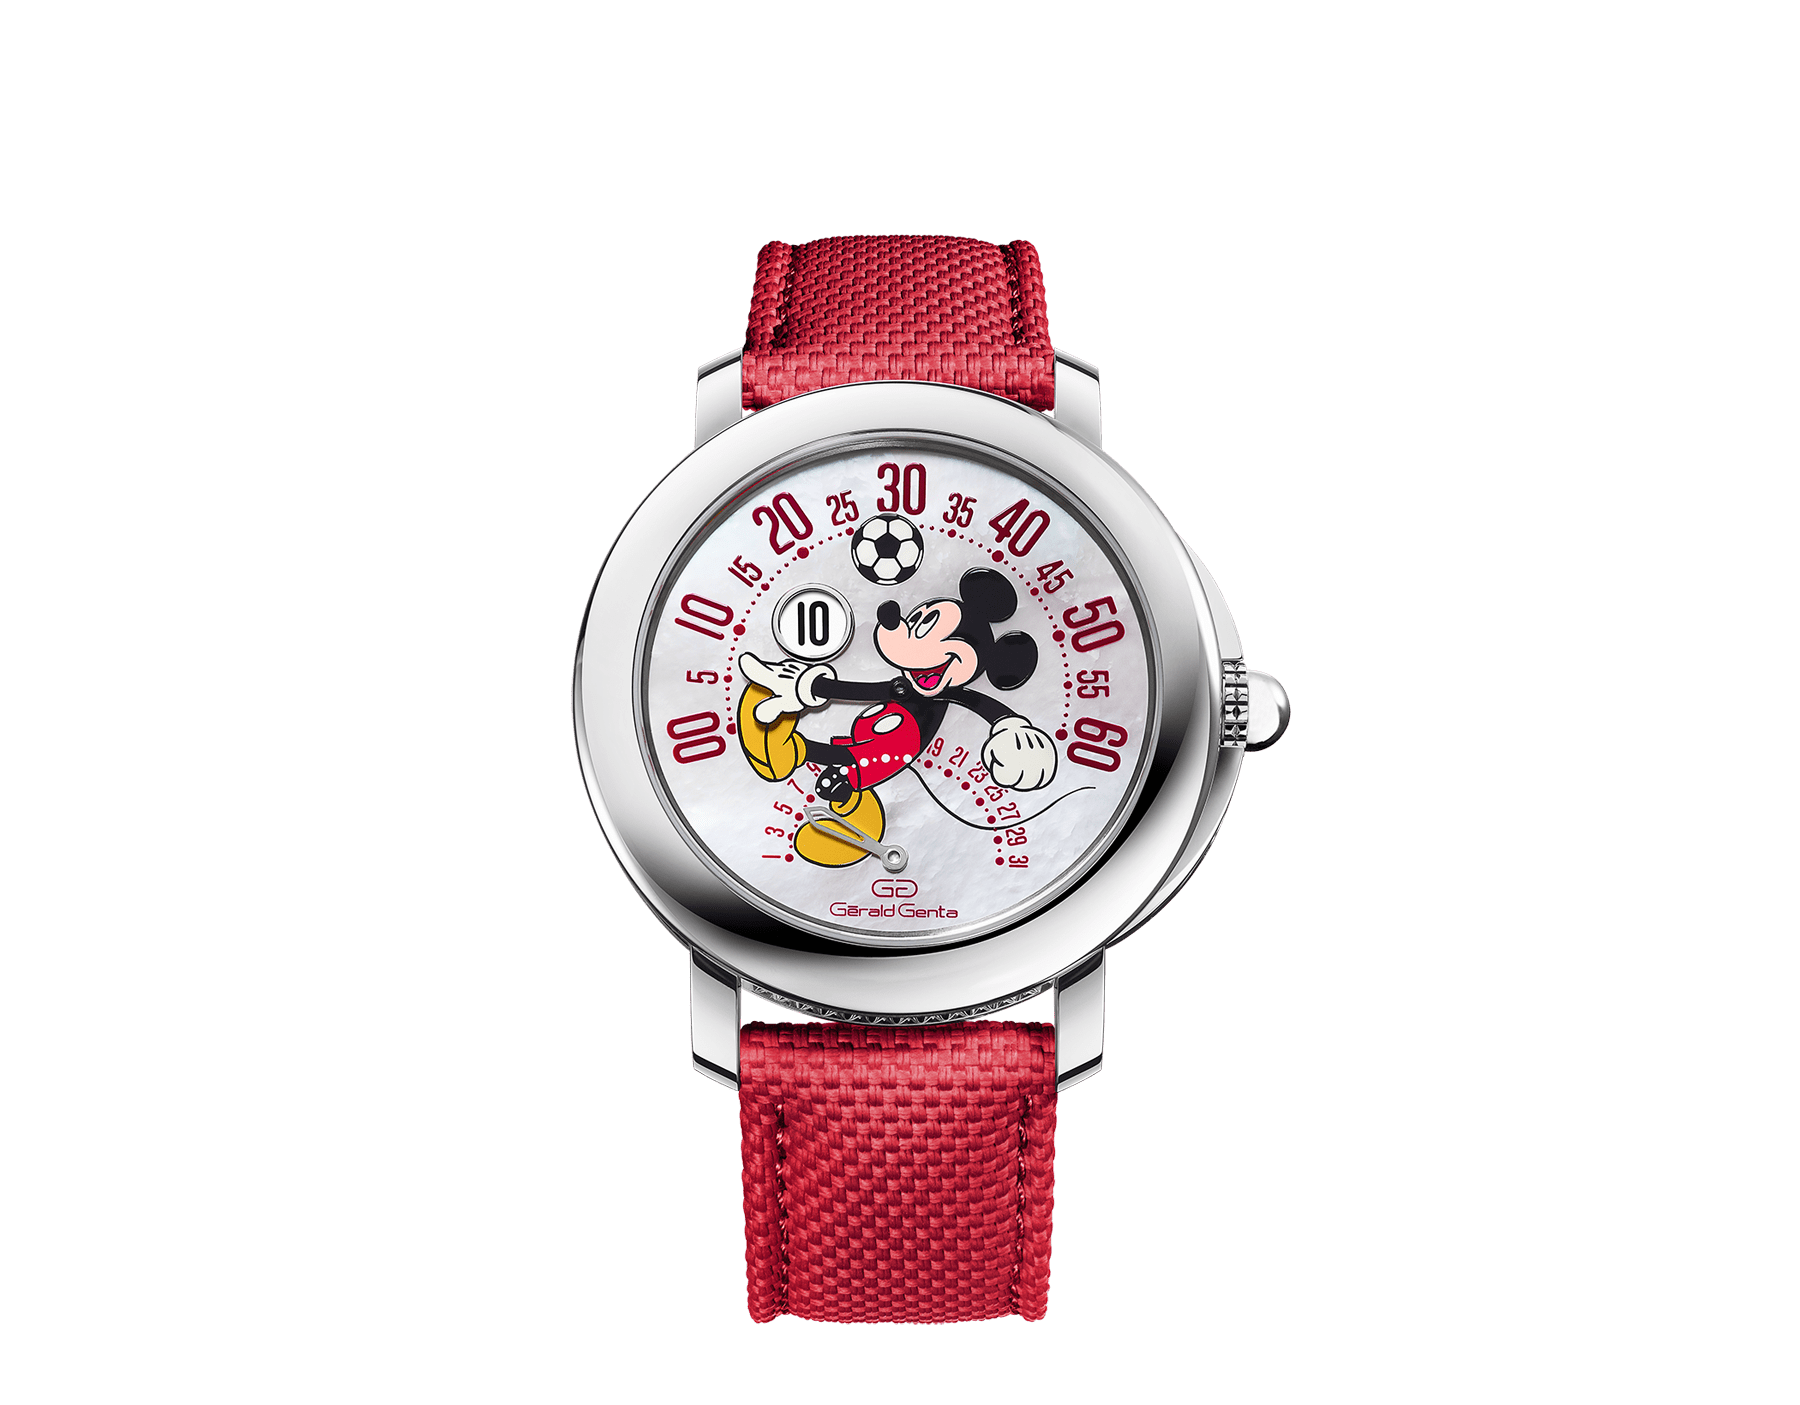 Gerald Genta Arena bi-retrograde watch with Disney’s Mickey Mouse playing football, mechanical manufacture movement with automatic bi-directional winding, jumping hours and retrograde minutes, 42 hours of power reserve, 41 mm polished stainless steel case, transparent case back, mother-of-pearl dial with lacquered Mickey Mouse arm hand and textured red rubber bracelet. Water-resistant up to 100 meters. Limited edition of 200 pieces. 103786 image 1